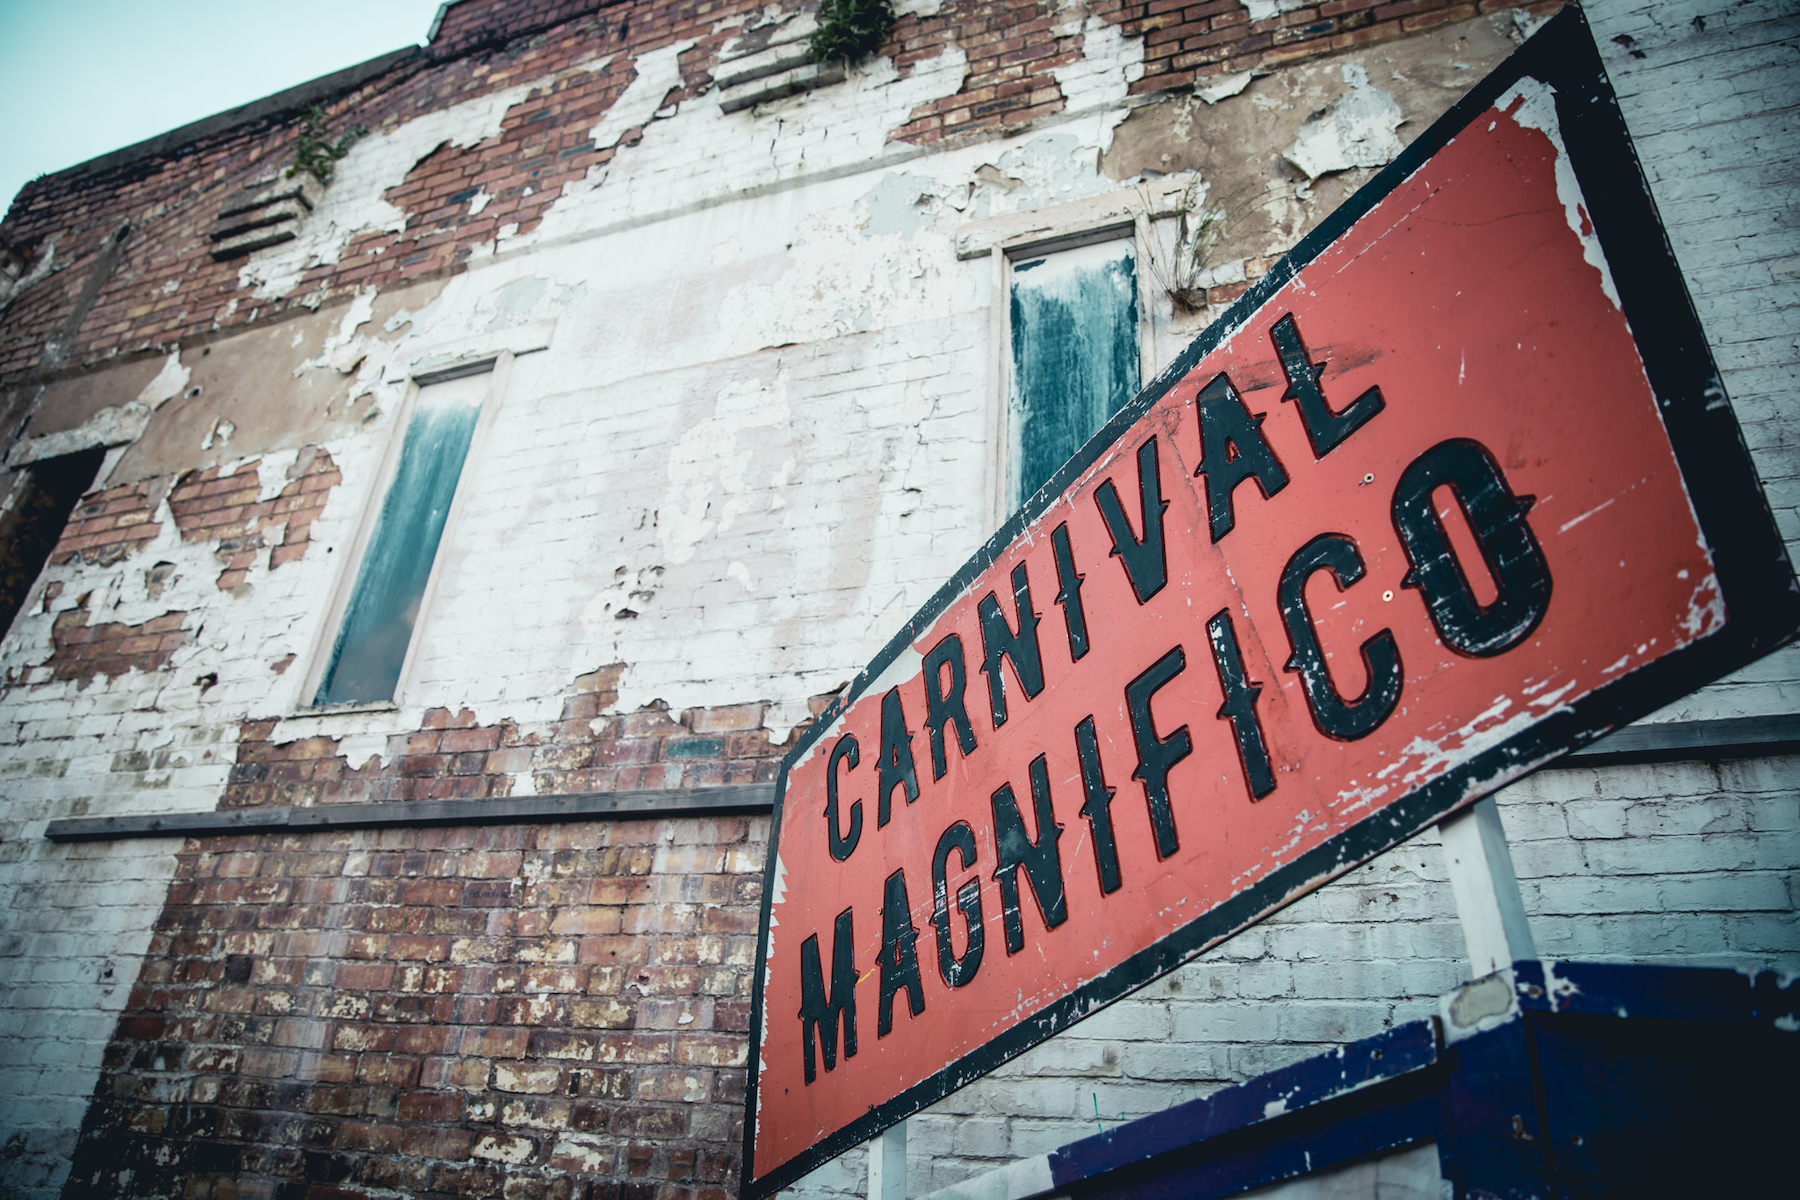  CARNIVAL MAGNIFICO 2019 reveals FULL LINEUP!